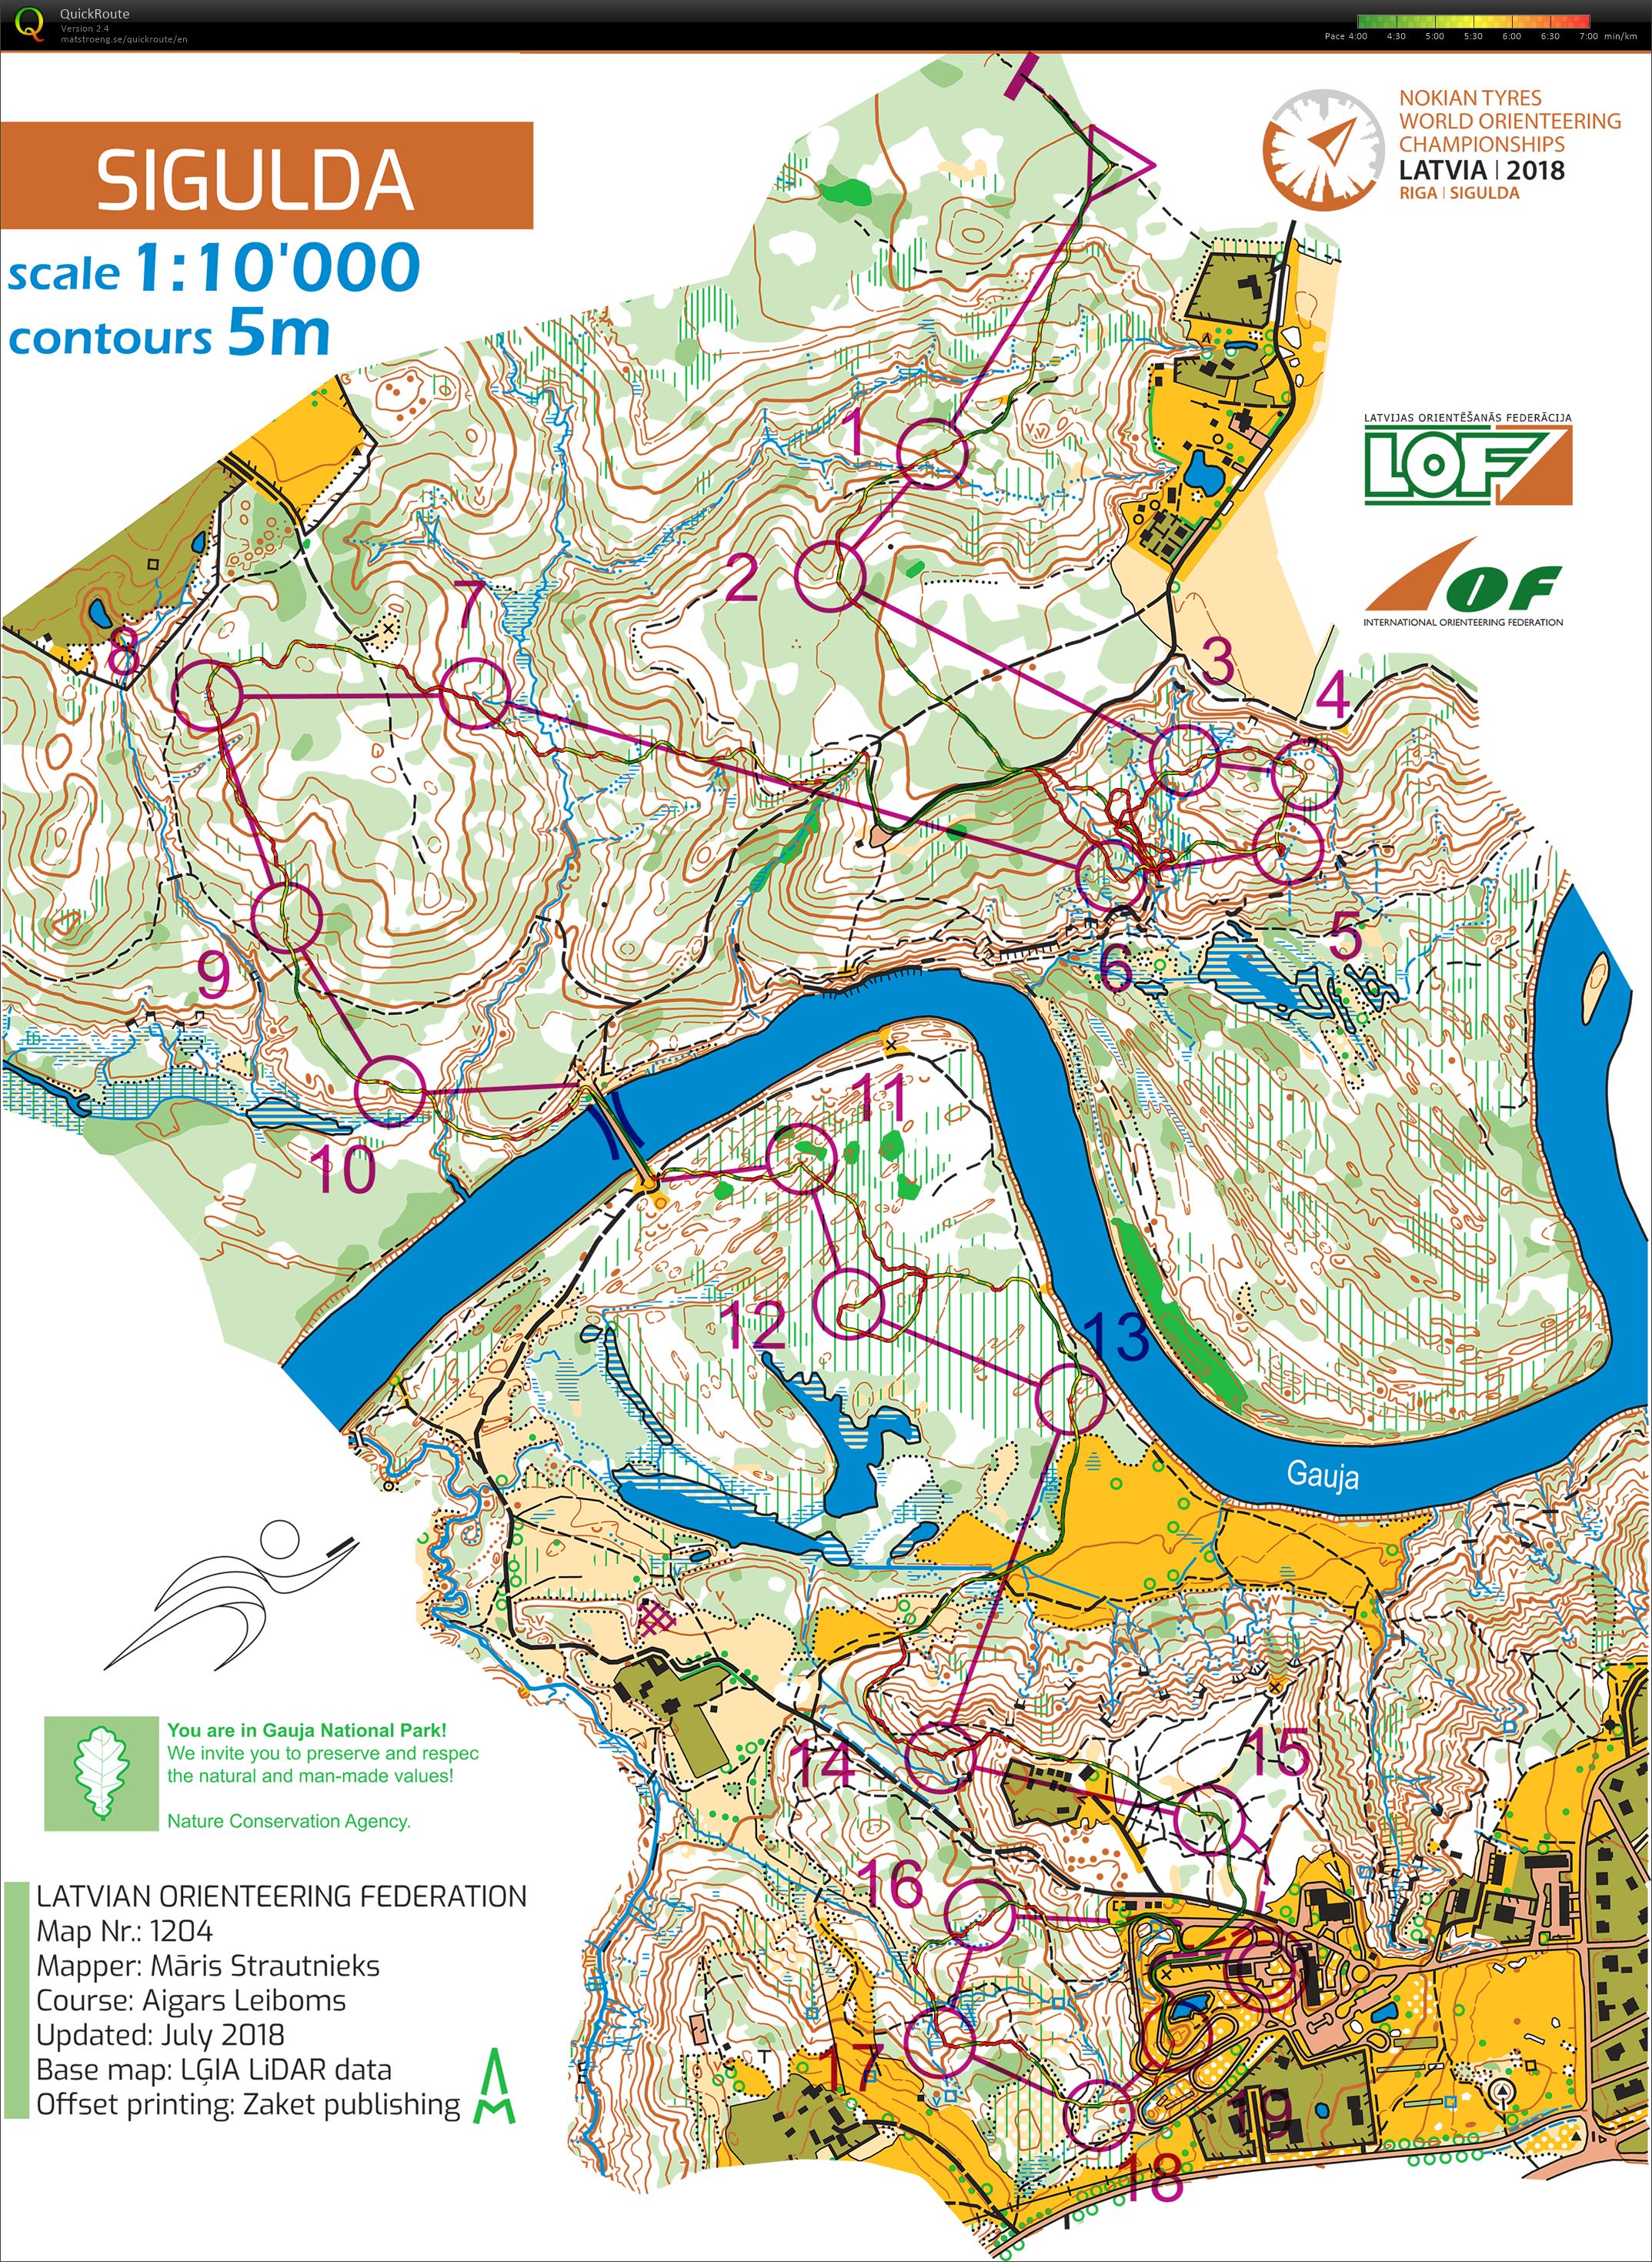 WOC 2018 Middle (07-08-2018)